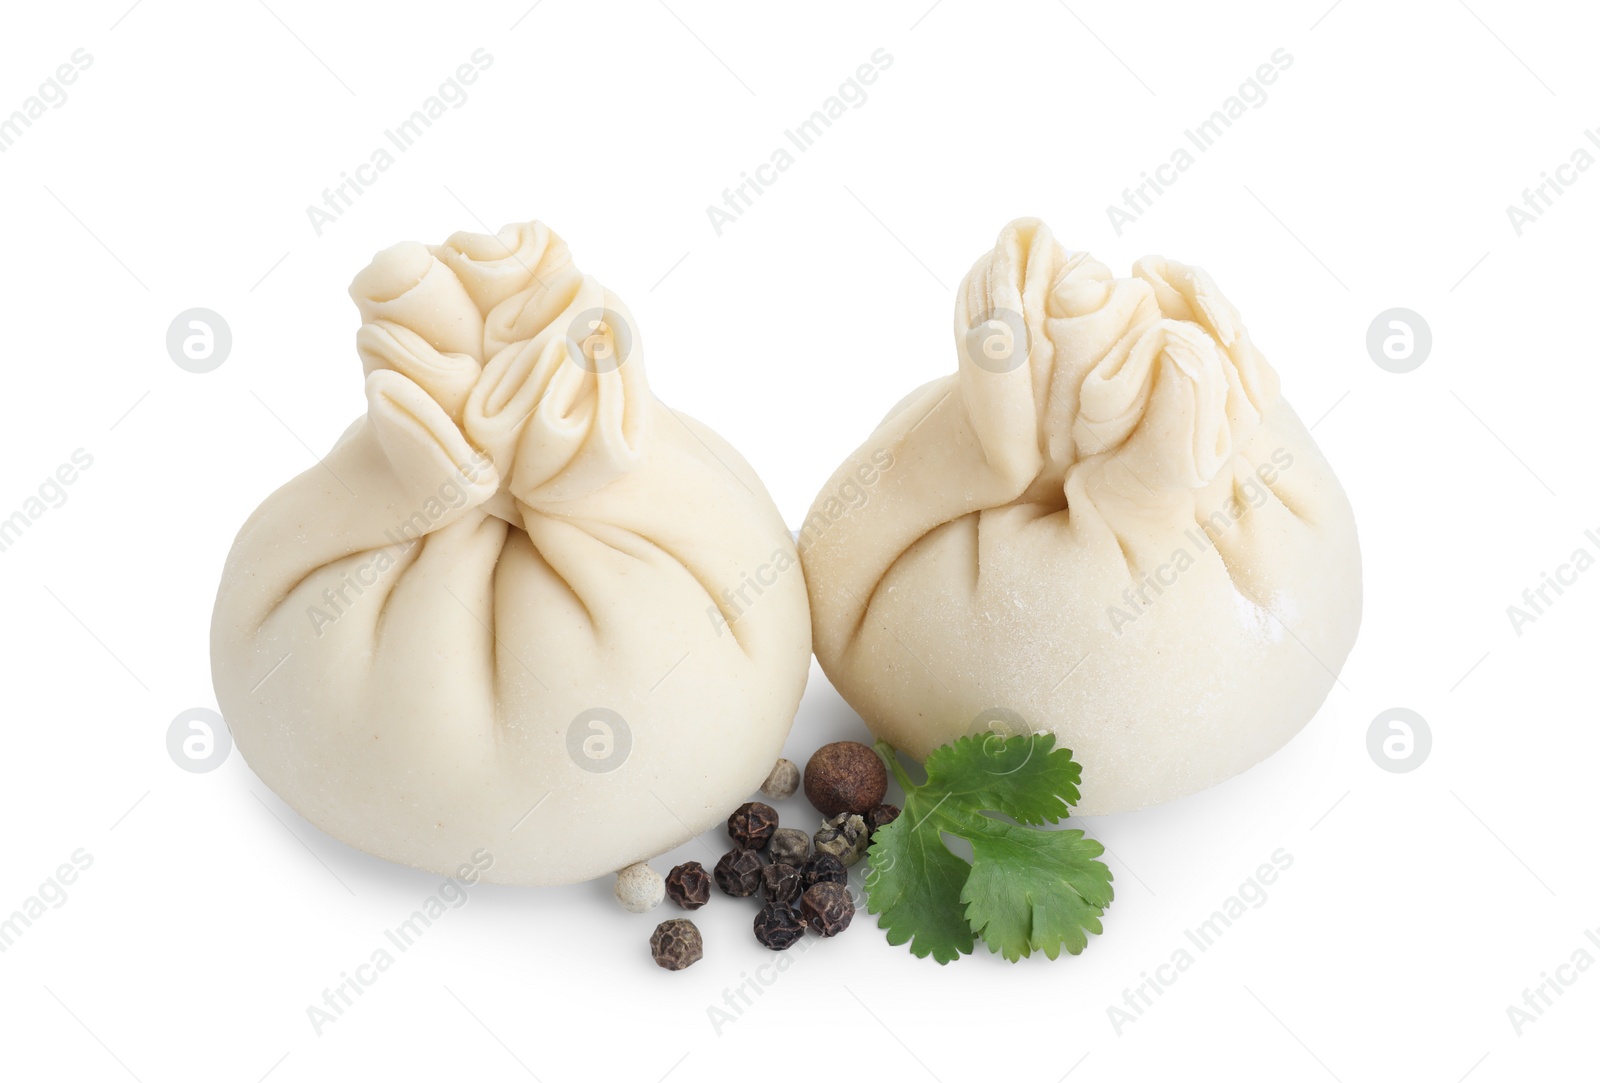 Photo of Uncooked khinkali (dumplings) and spices isolated on white. Georgian cuisine